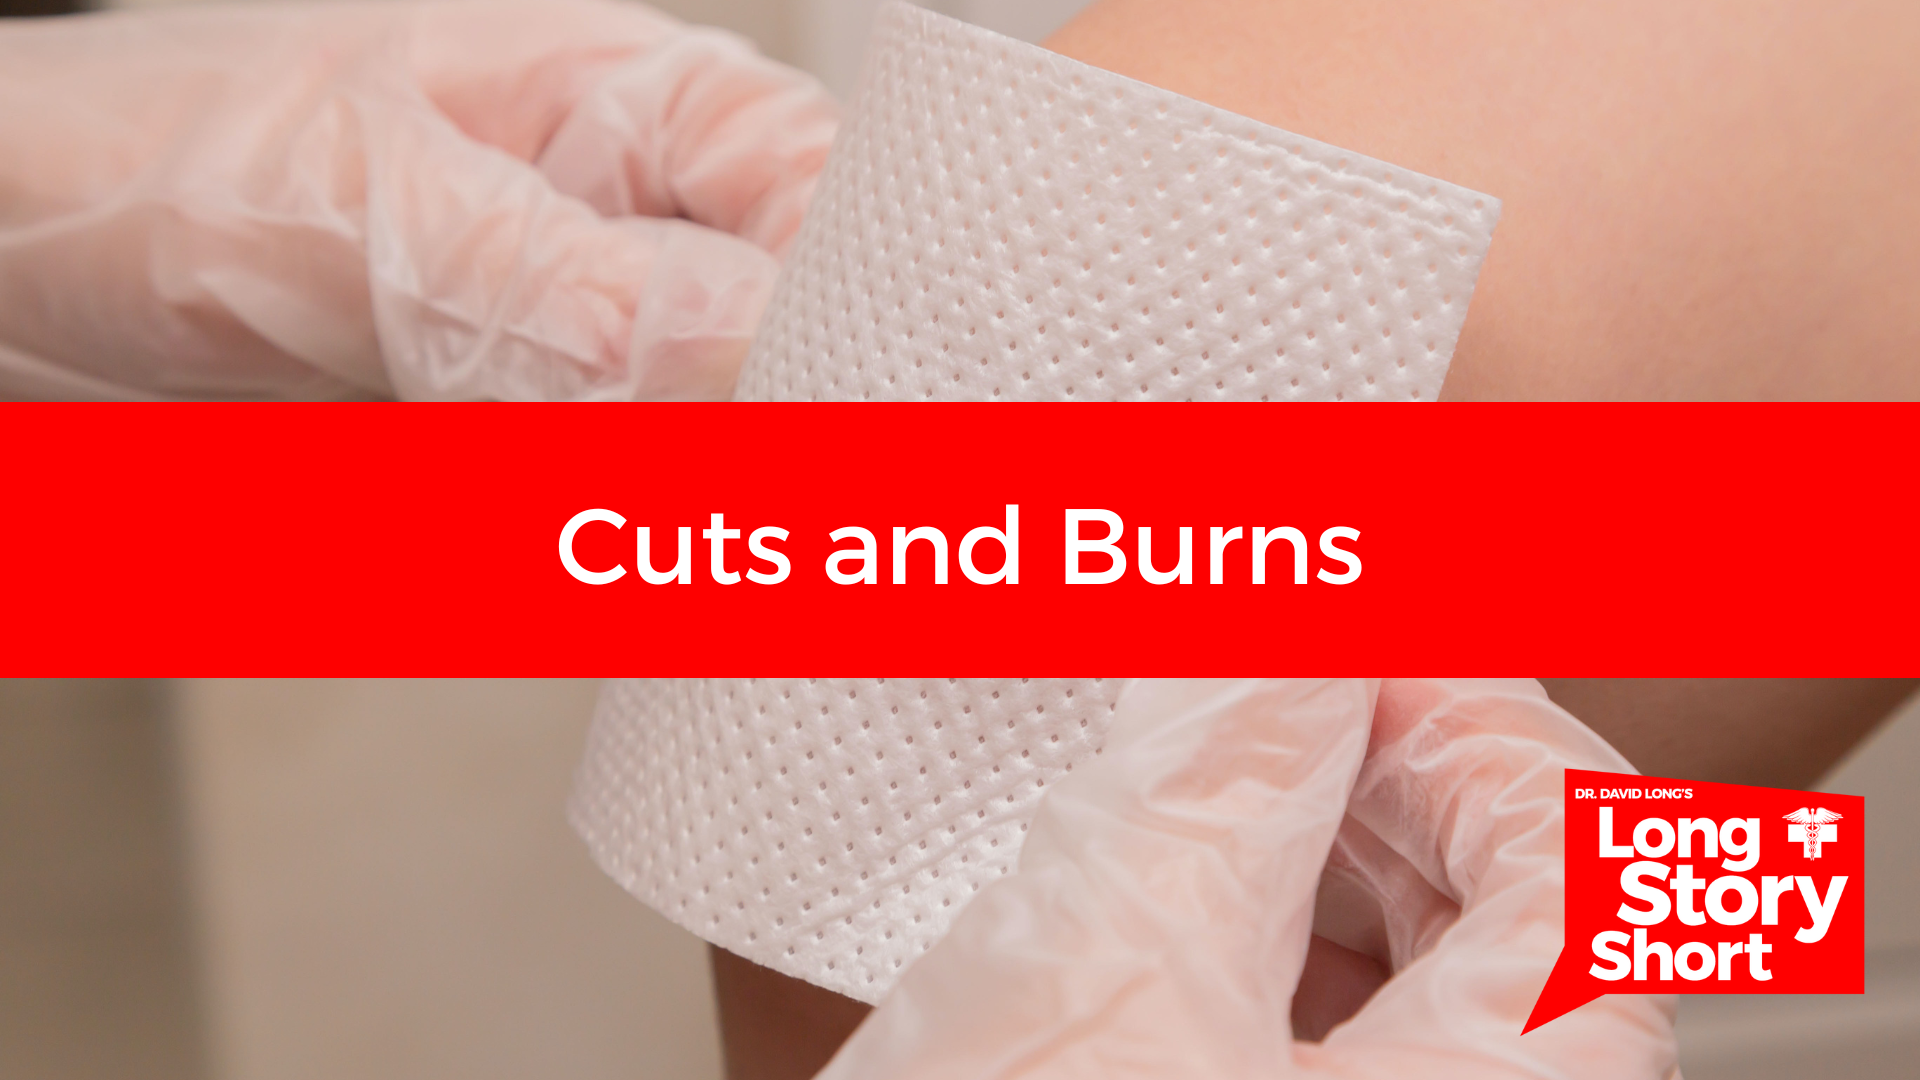 You are currently viewing Cuts and Burns – Dr. David Long